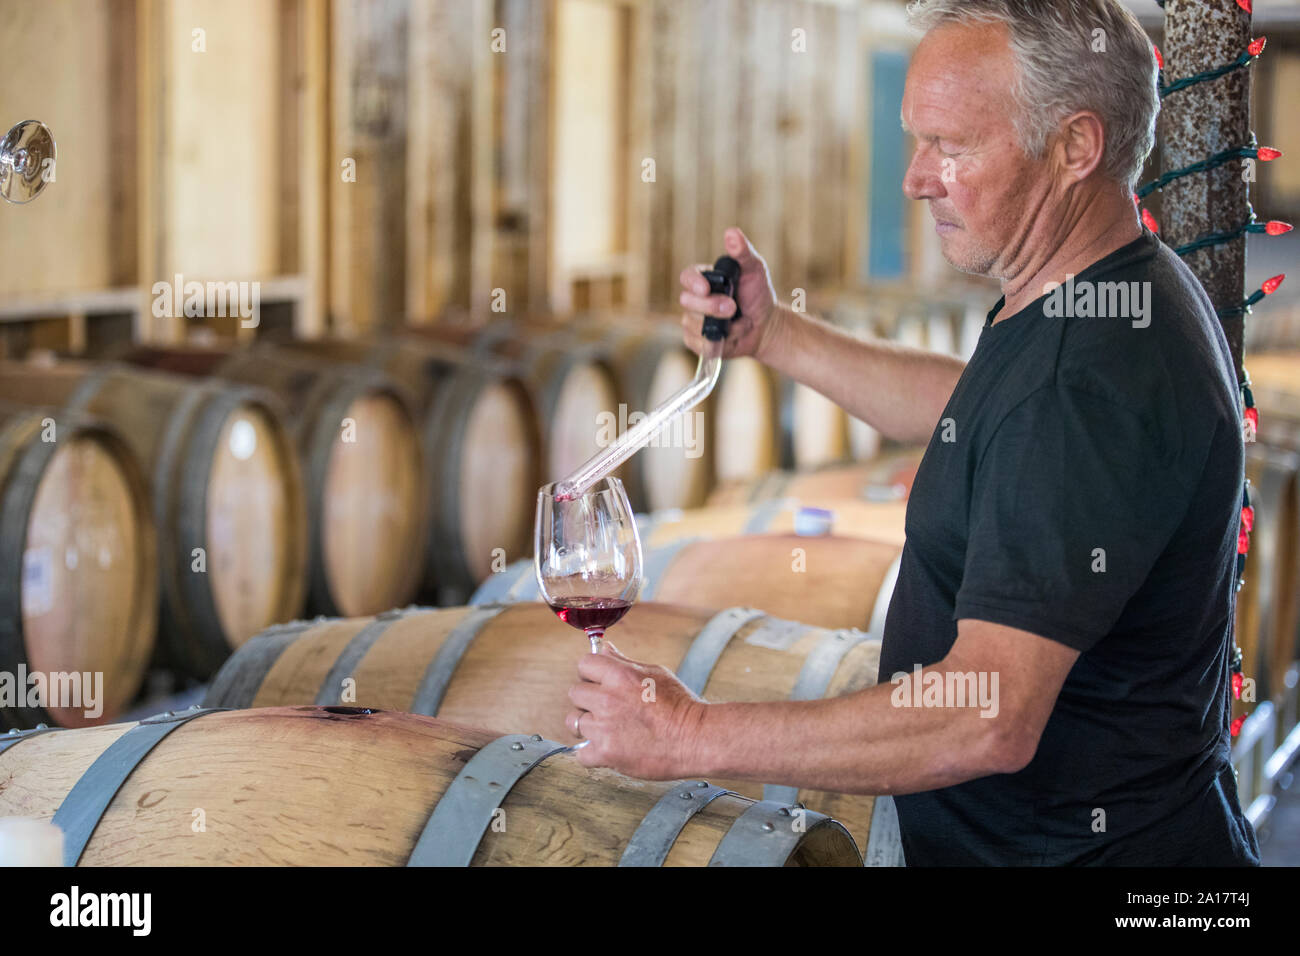 winemaker uses pipette to pour sample glass of wine to taste test Stock Photo